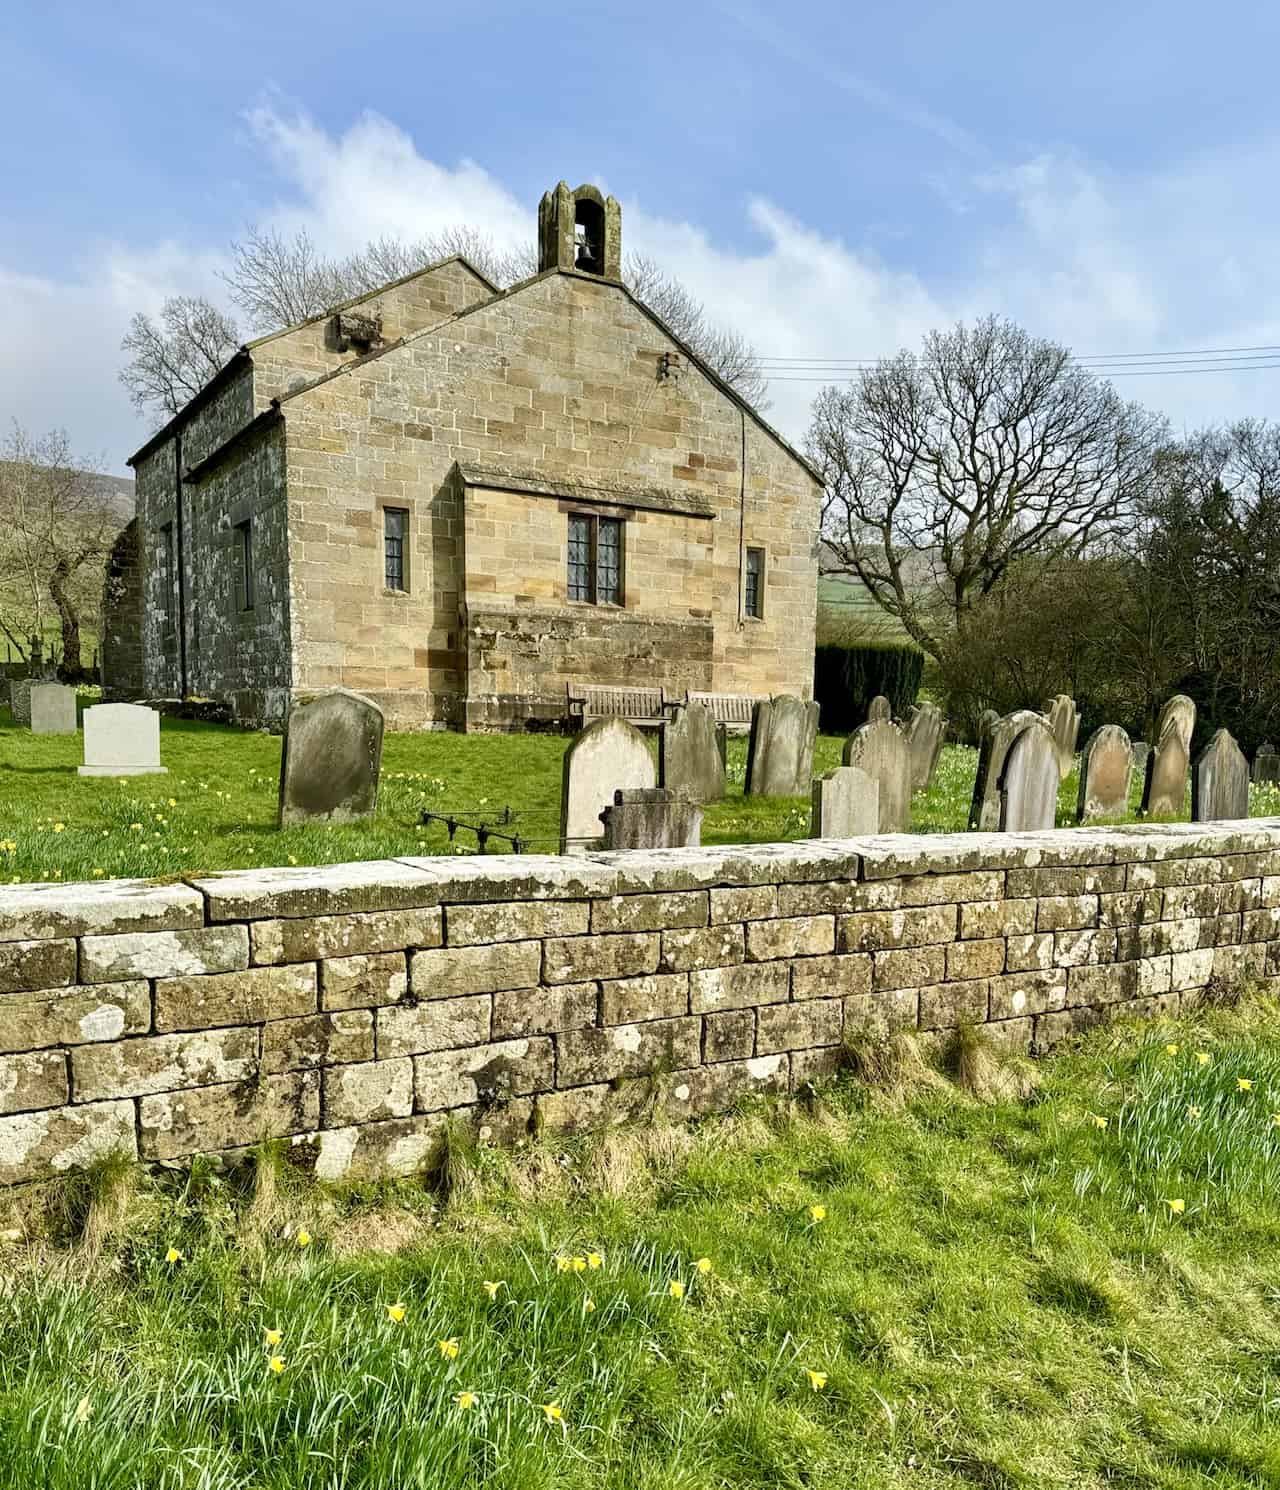 St. Mary's Church, located on Mackeridge Lane in Church Houses, Farndale, is a Grade II listed building as of 13 July 1955. Marking the halfway point of this Farndale daffodils walk, it signals the time to return, rounding off the experience with historical and architectural interest.